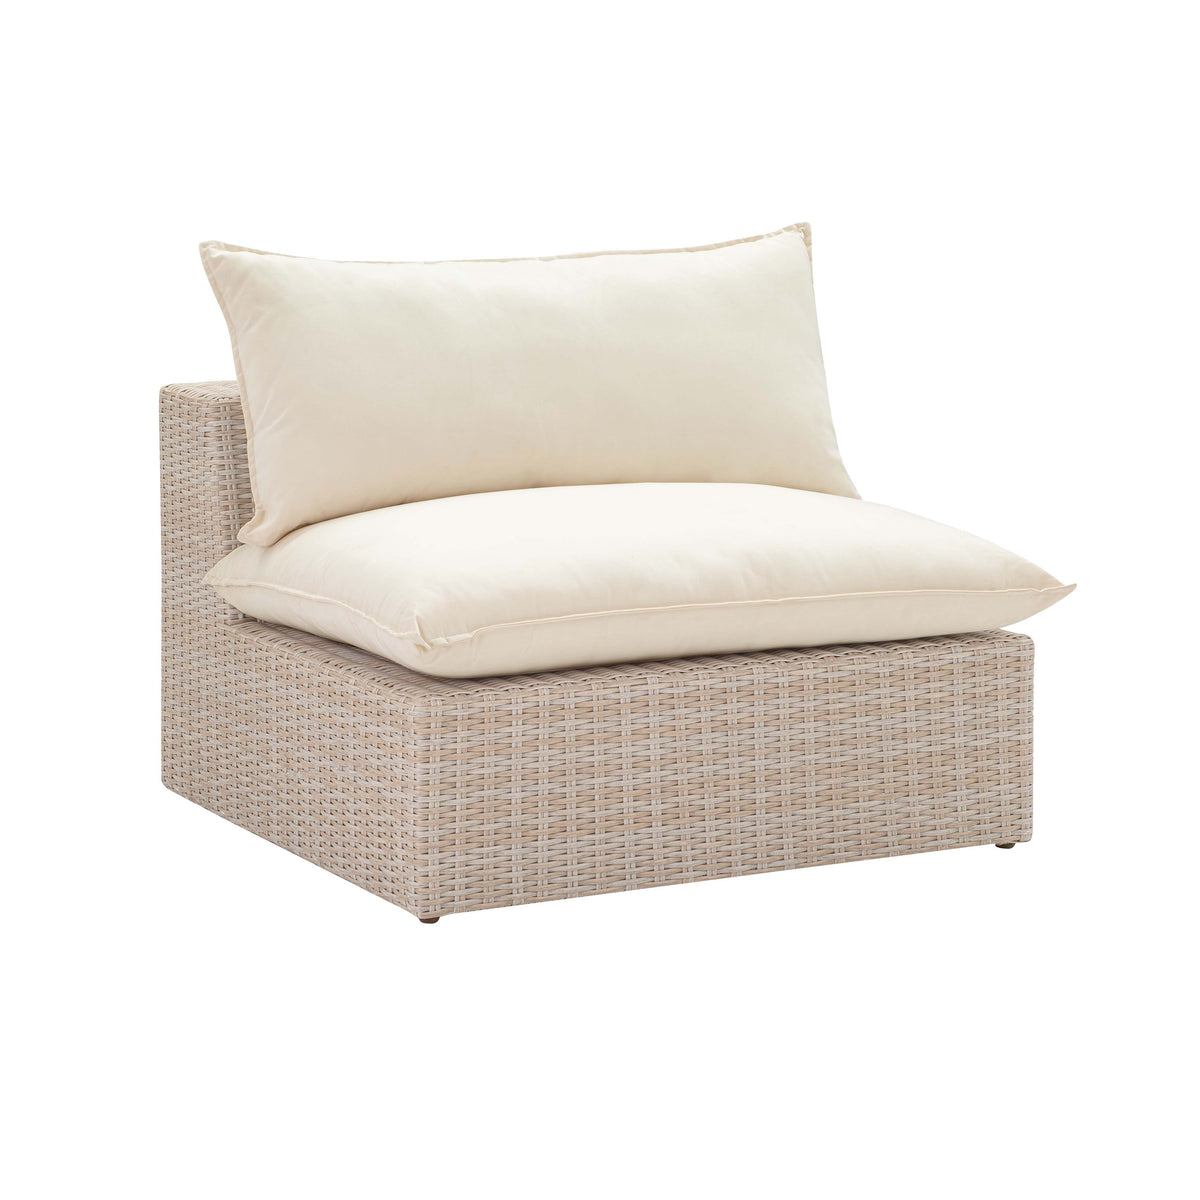 Calabasas Natural Outdoor Armless Chair - Luxury Living Collection